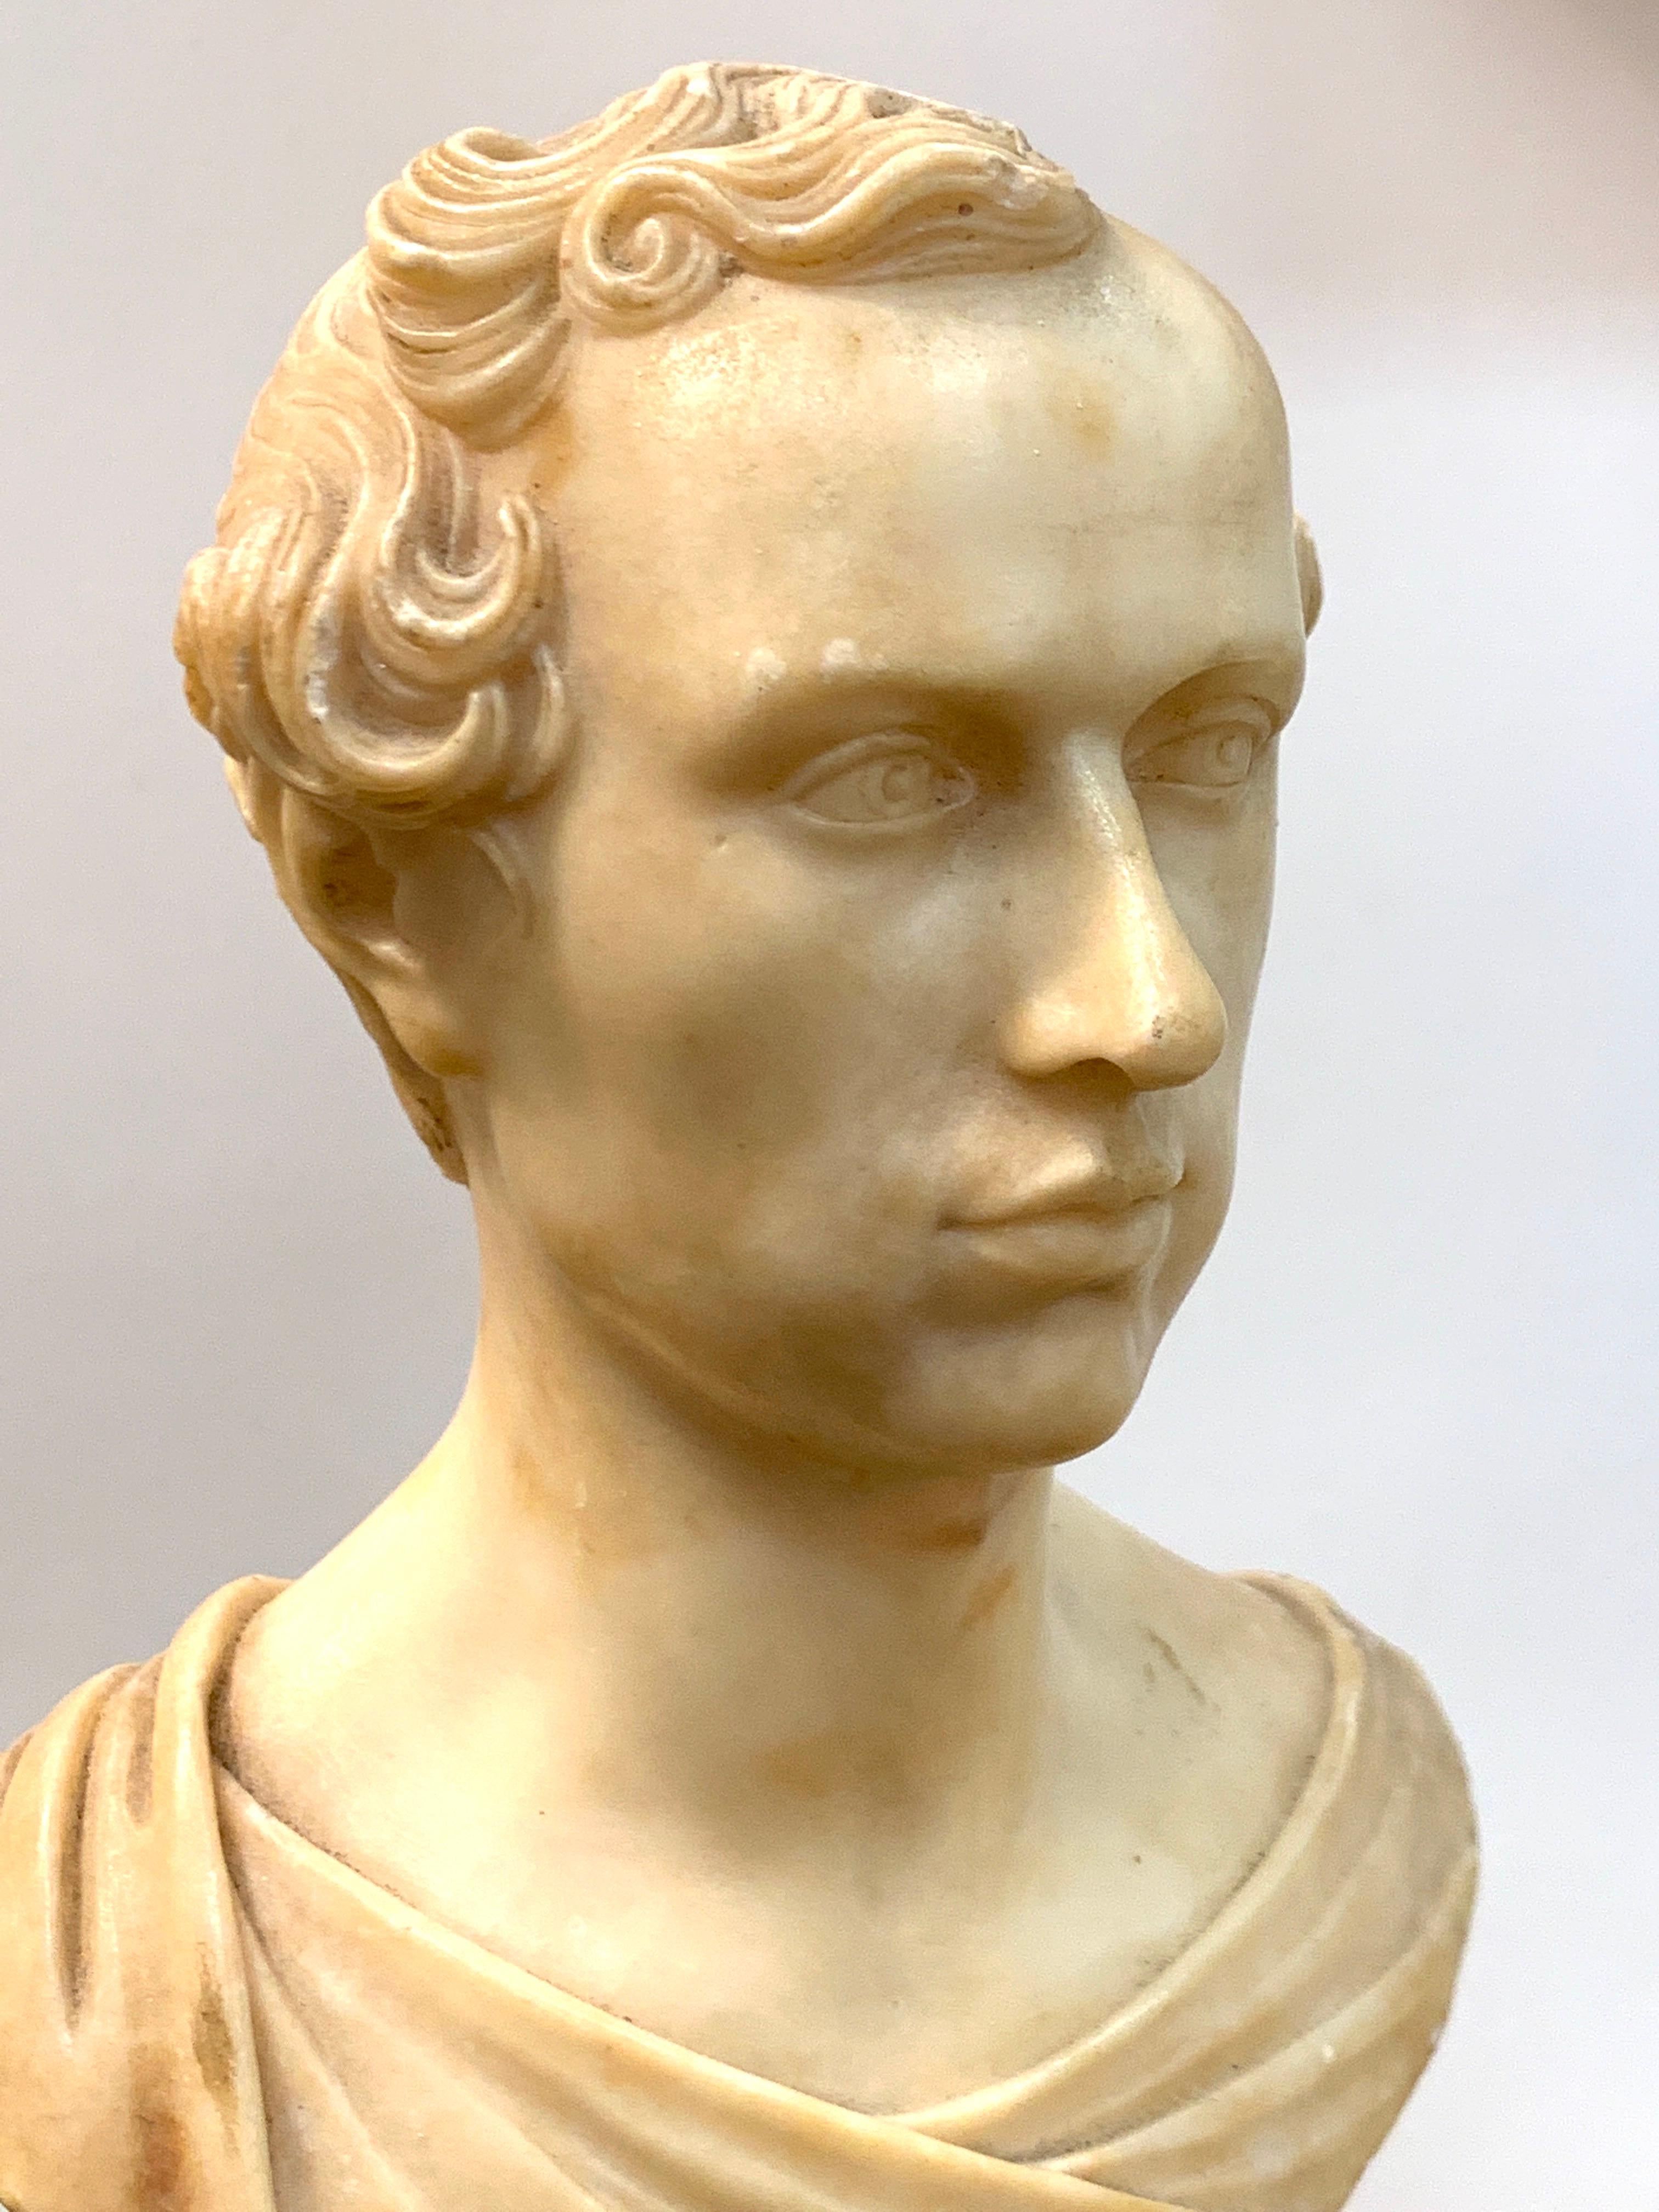 Mid-19th Century Italian Neoclassical Alabaster Portrait Bust of a Gentleman, by Insom Fece, 1839 For Sale